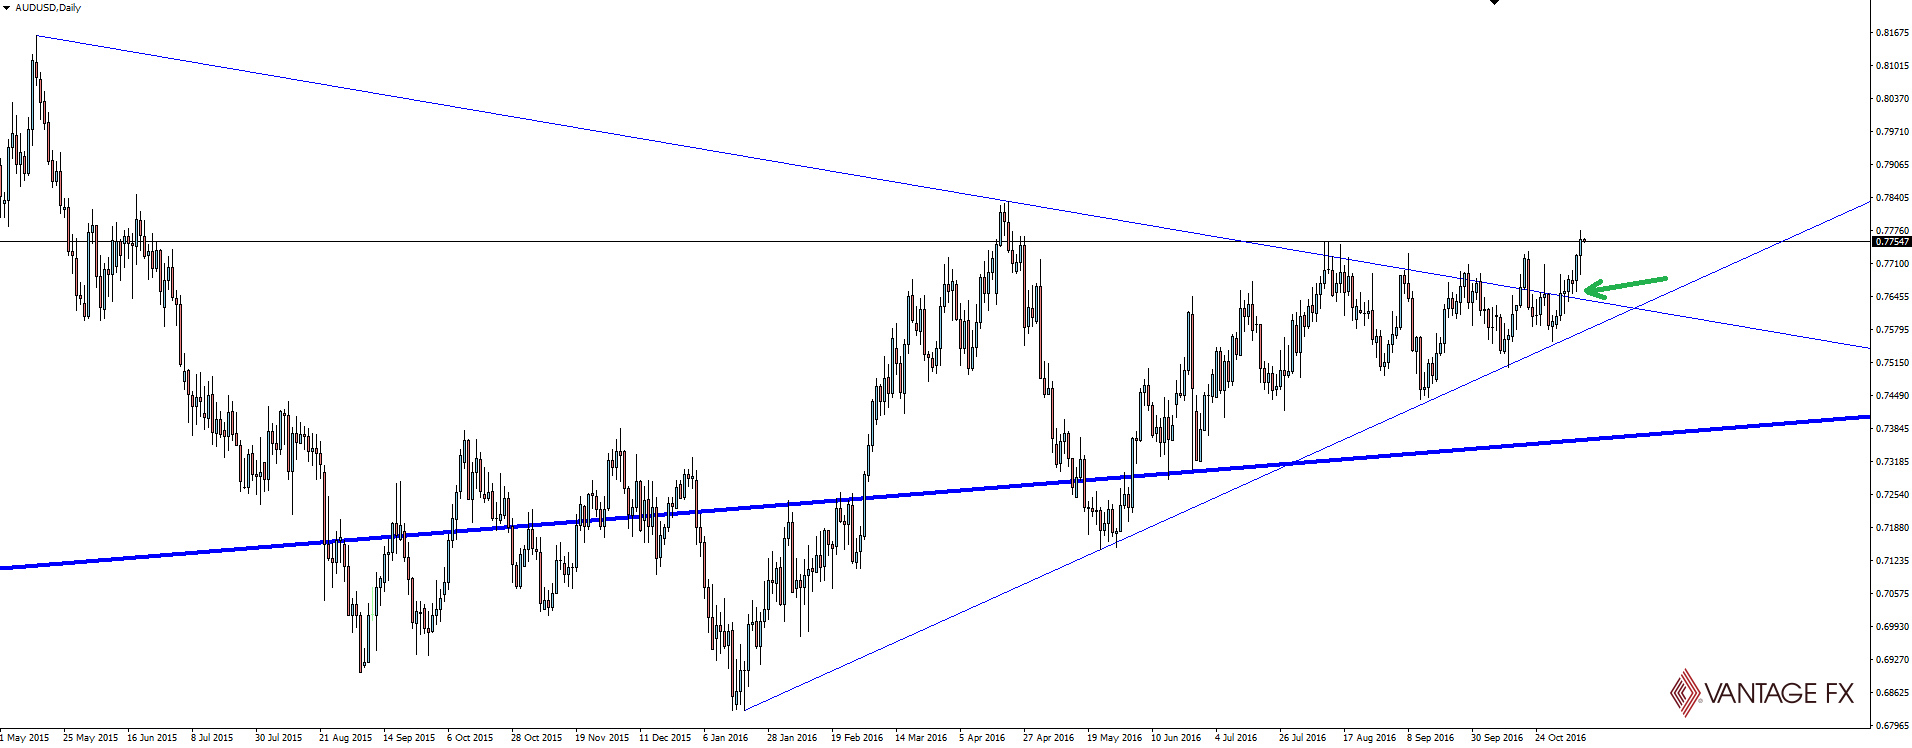 AUD/USD Daily Chart 2 